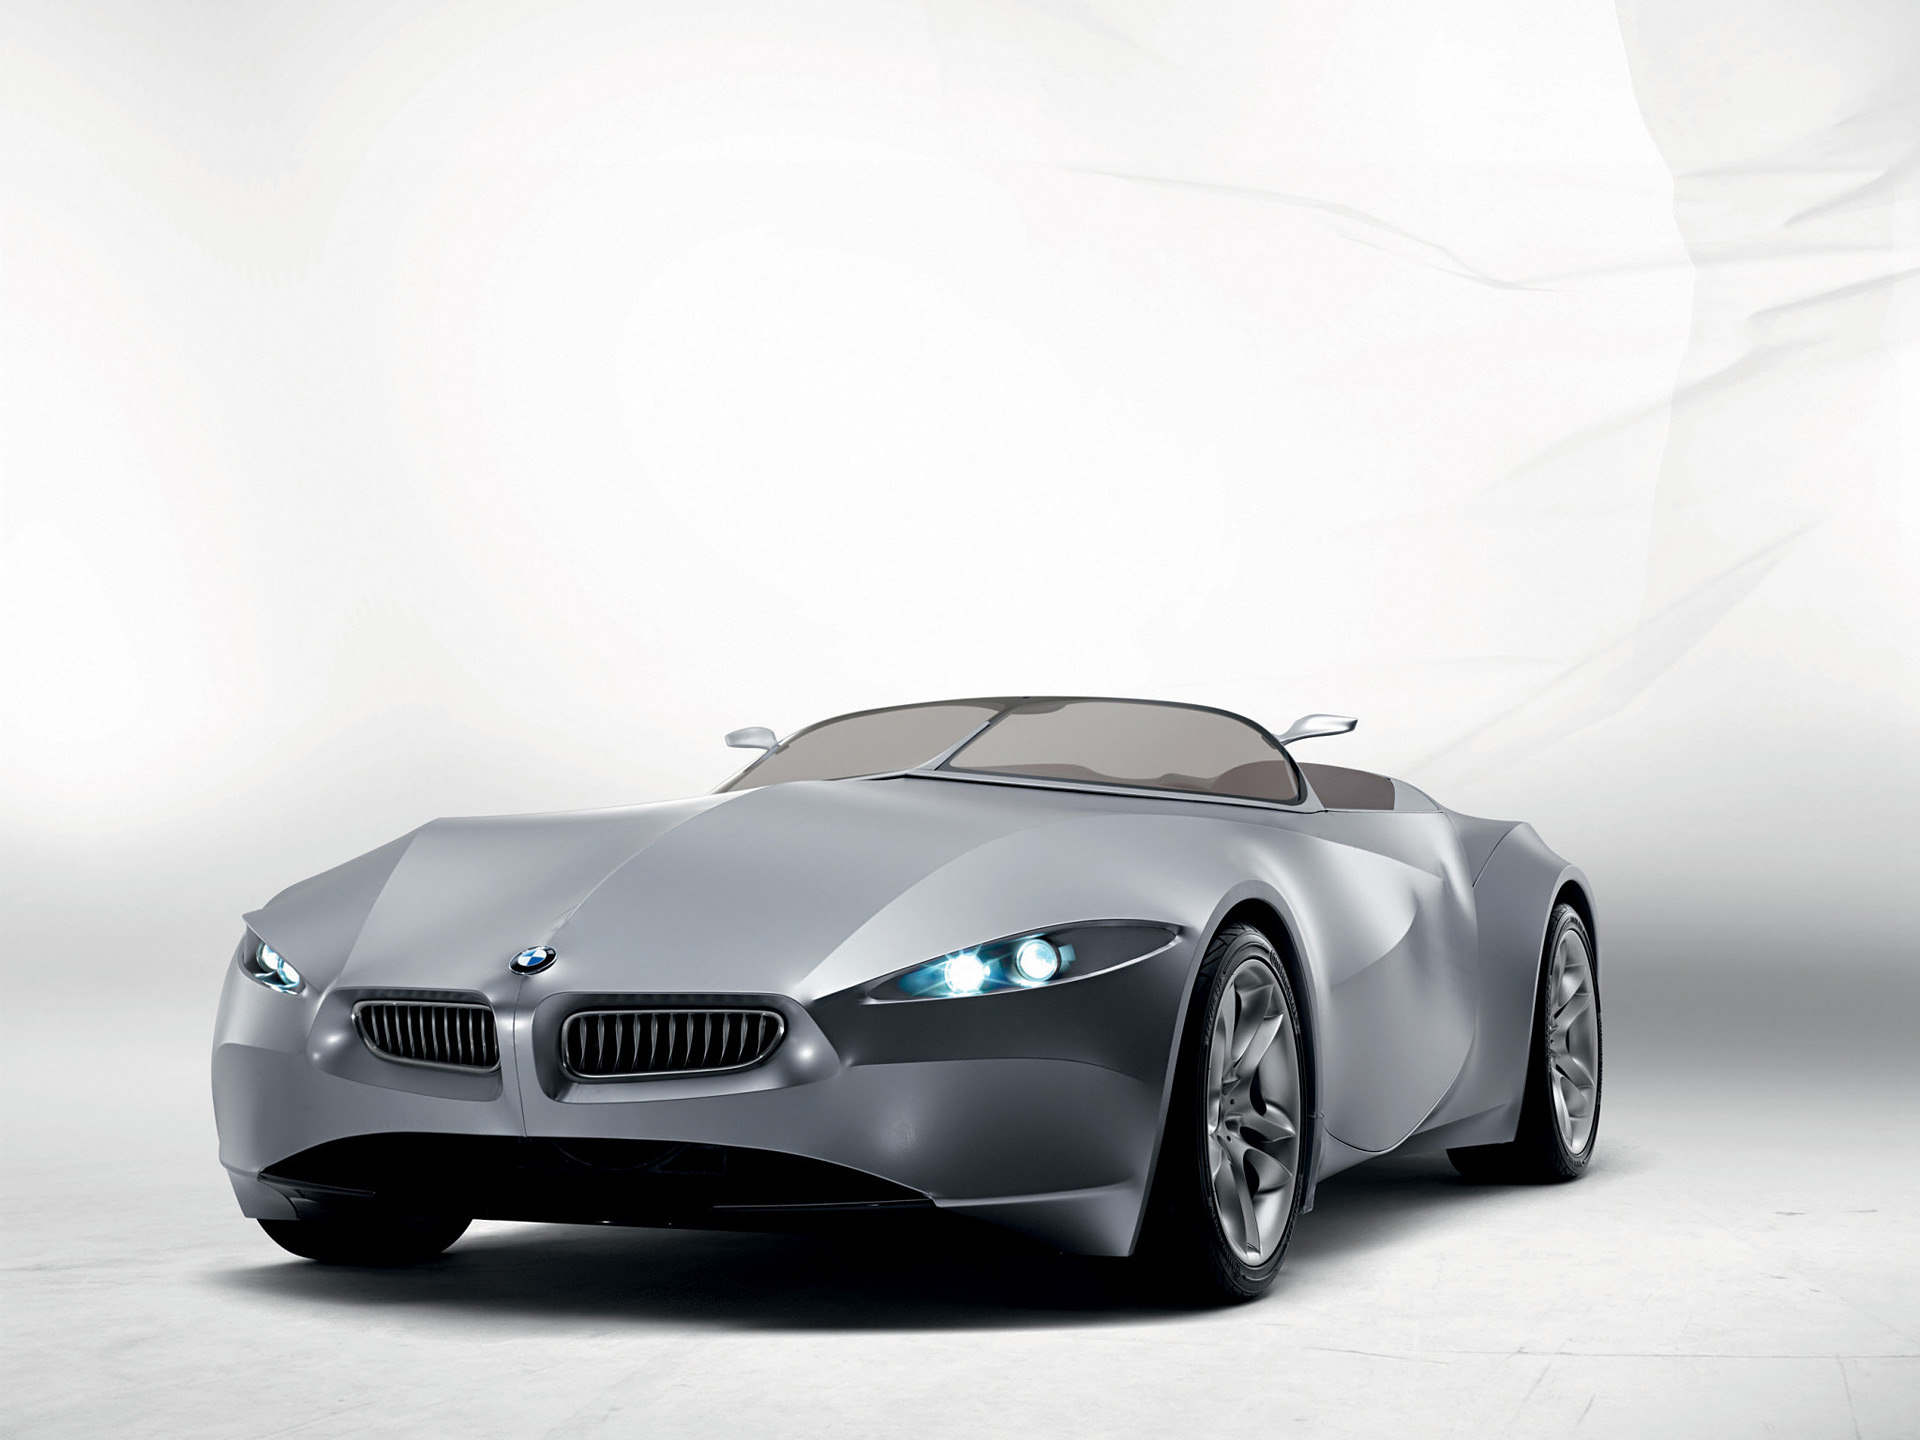 android vehicles, bmw gina light visionary model concept, car, concept car, silver car, bmw